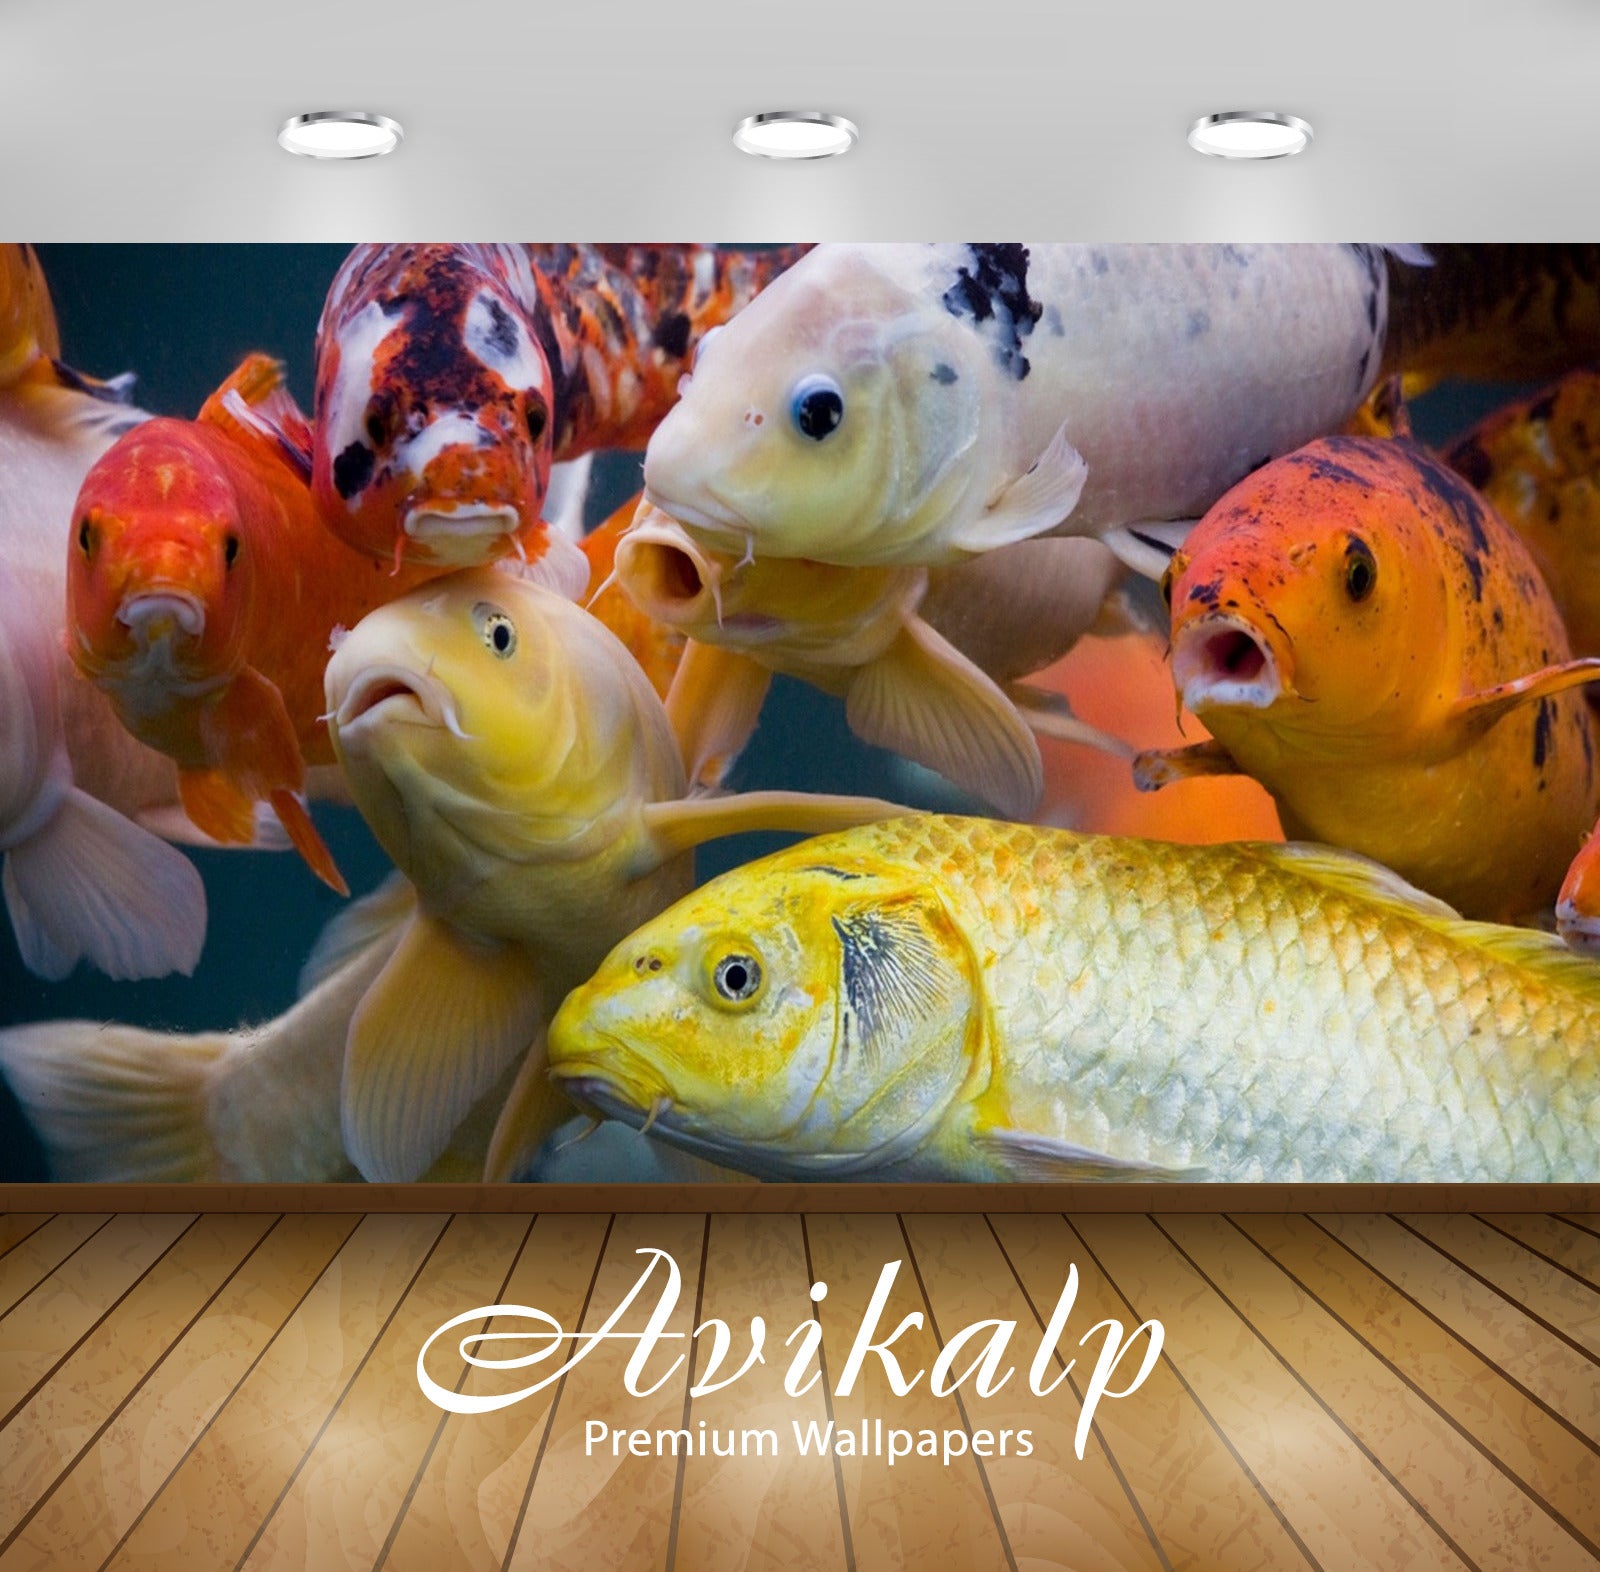 Avikalp Exclusive Awi2511 Colorful Fish Full HD Wallpapers for Living room, Hall, Kids Room, Kitchen